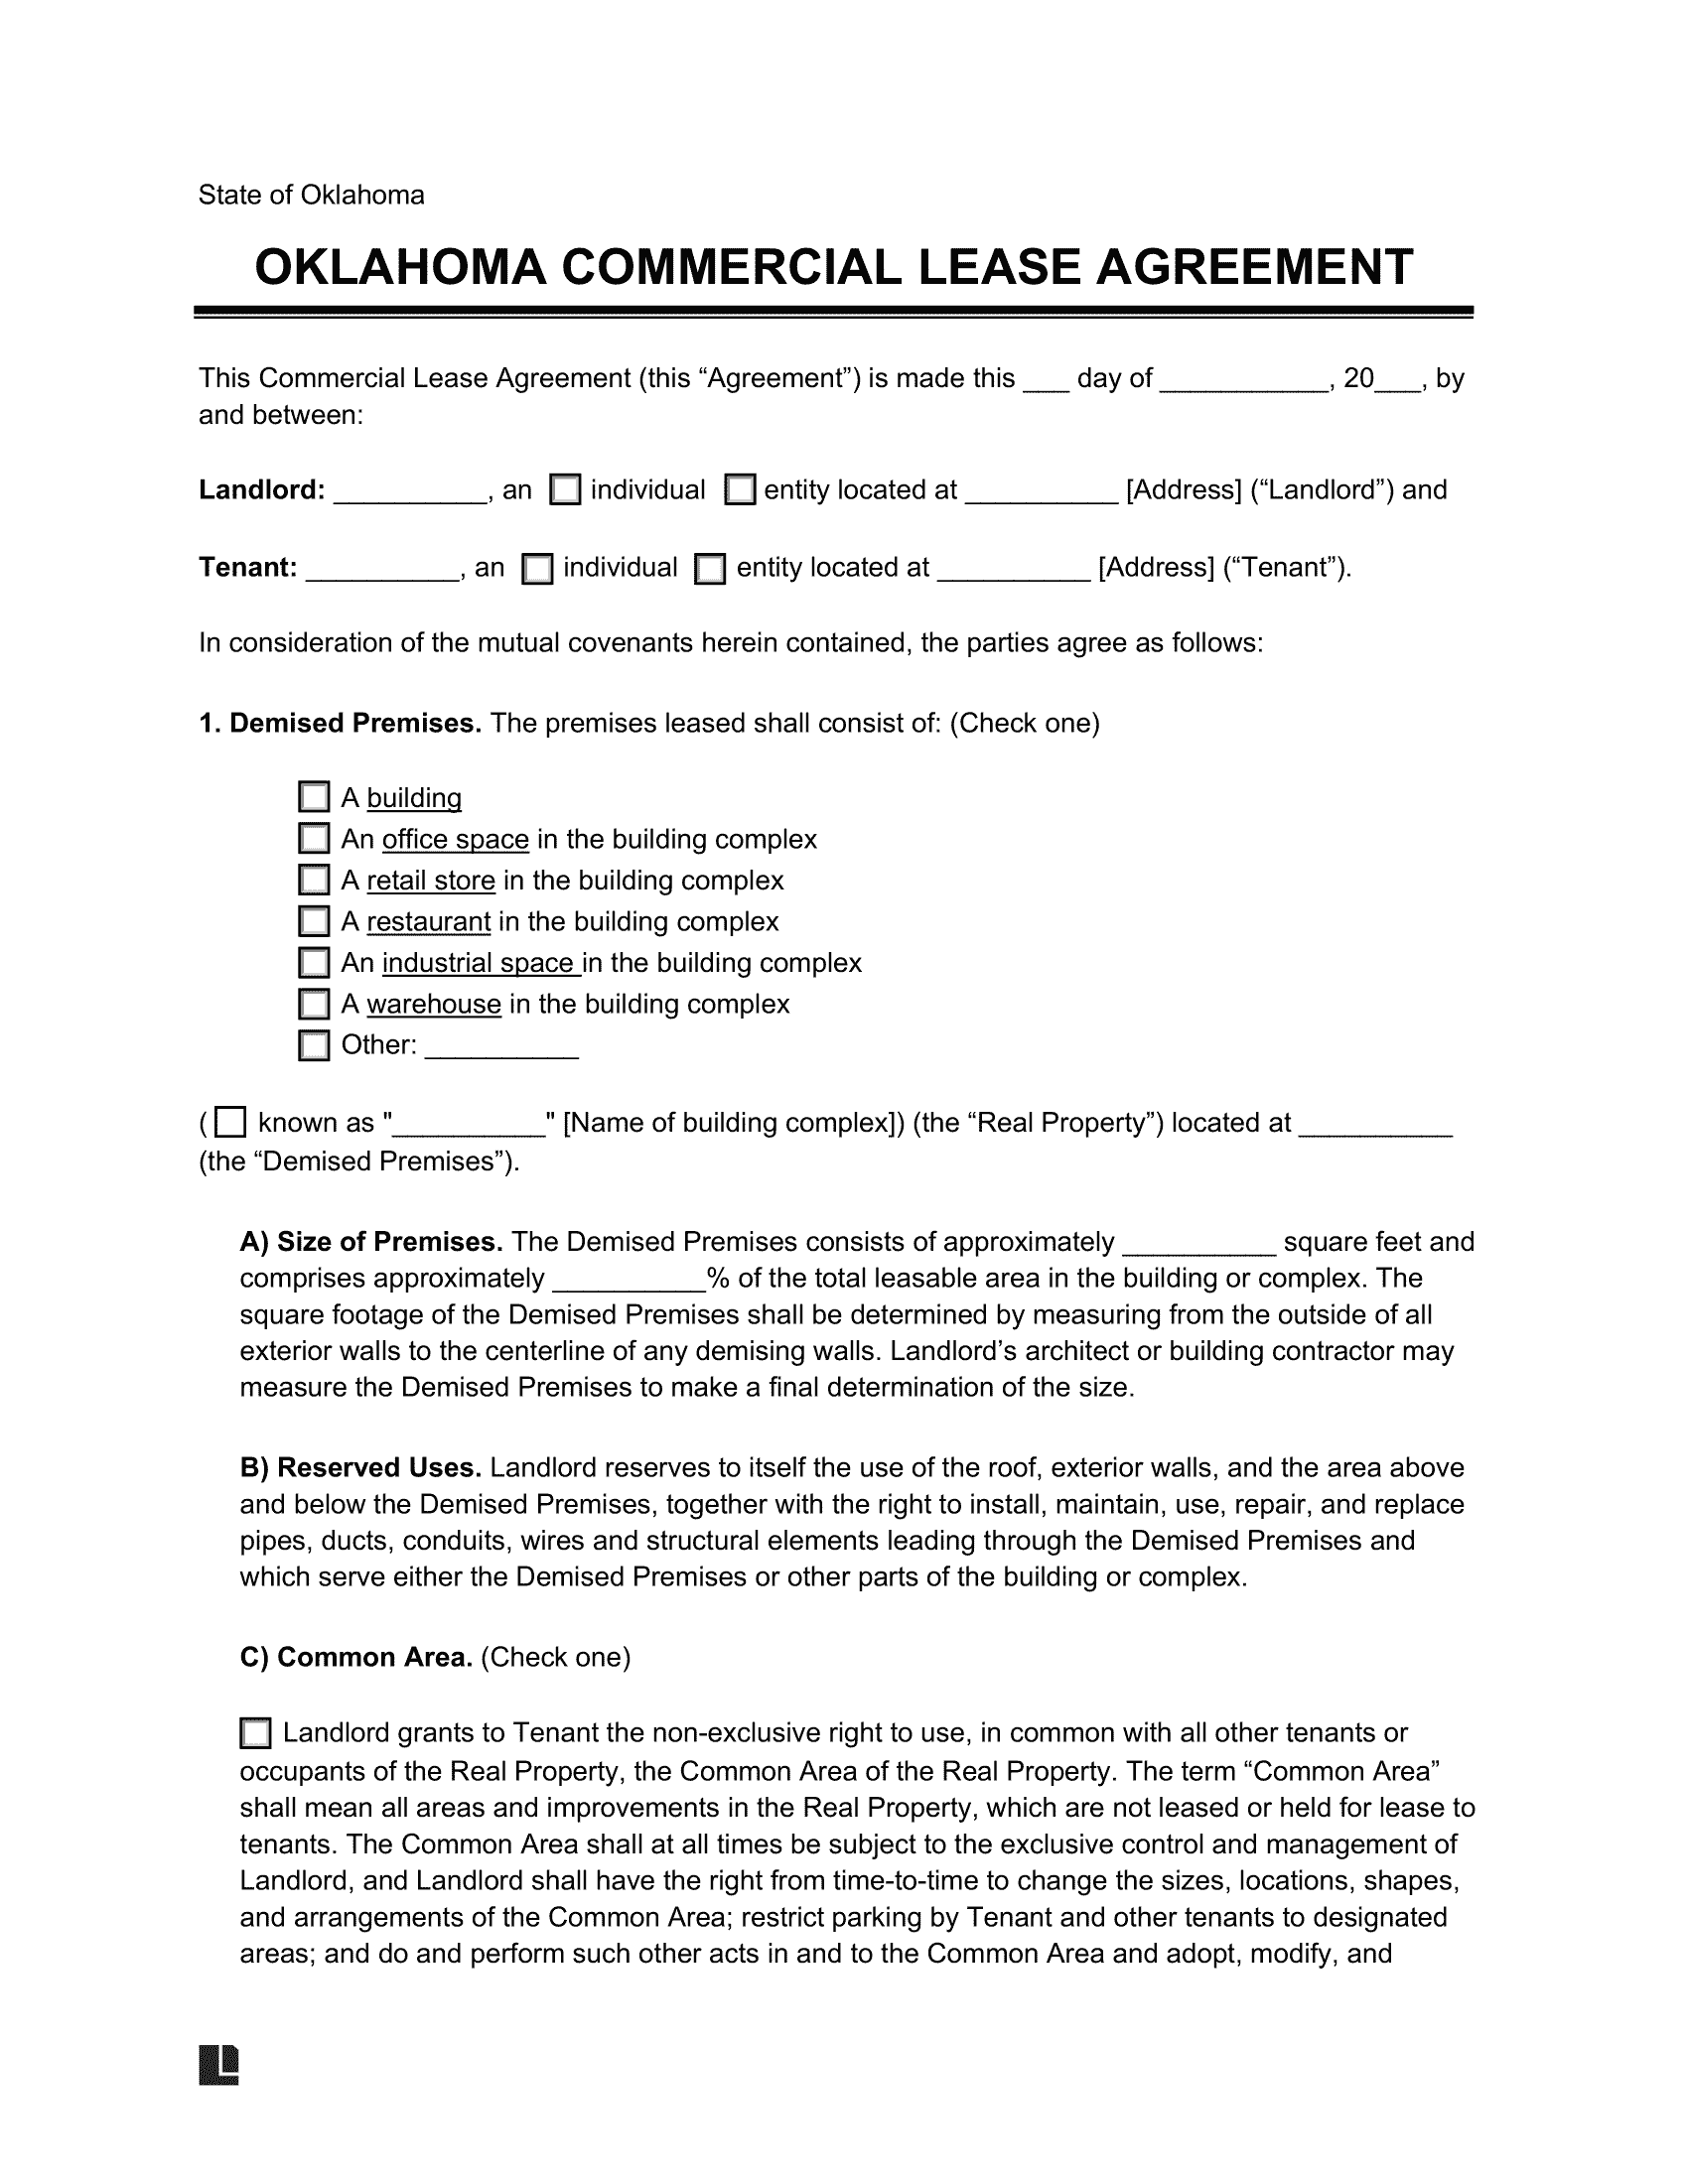 Oklahoma Commercial Lease Agreement